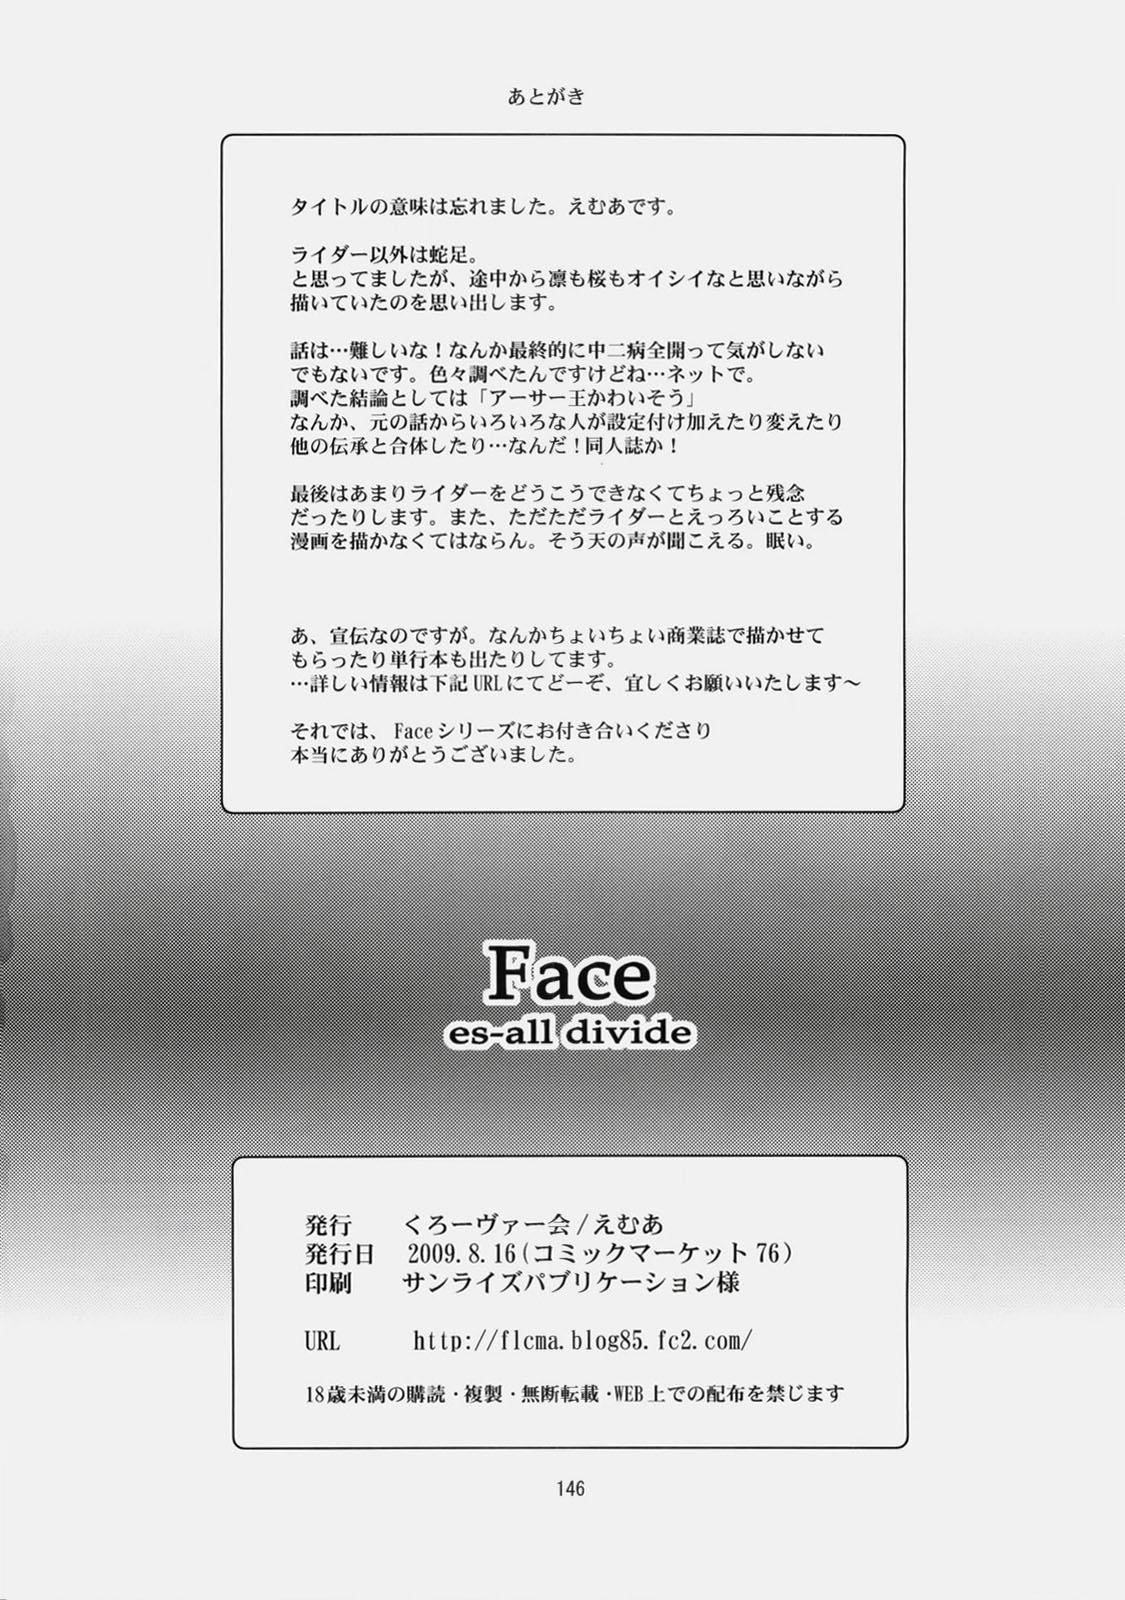 Skype Face es-all divide - Fate stay night Amature Sex Tapes - Page 143